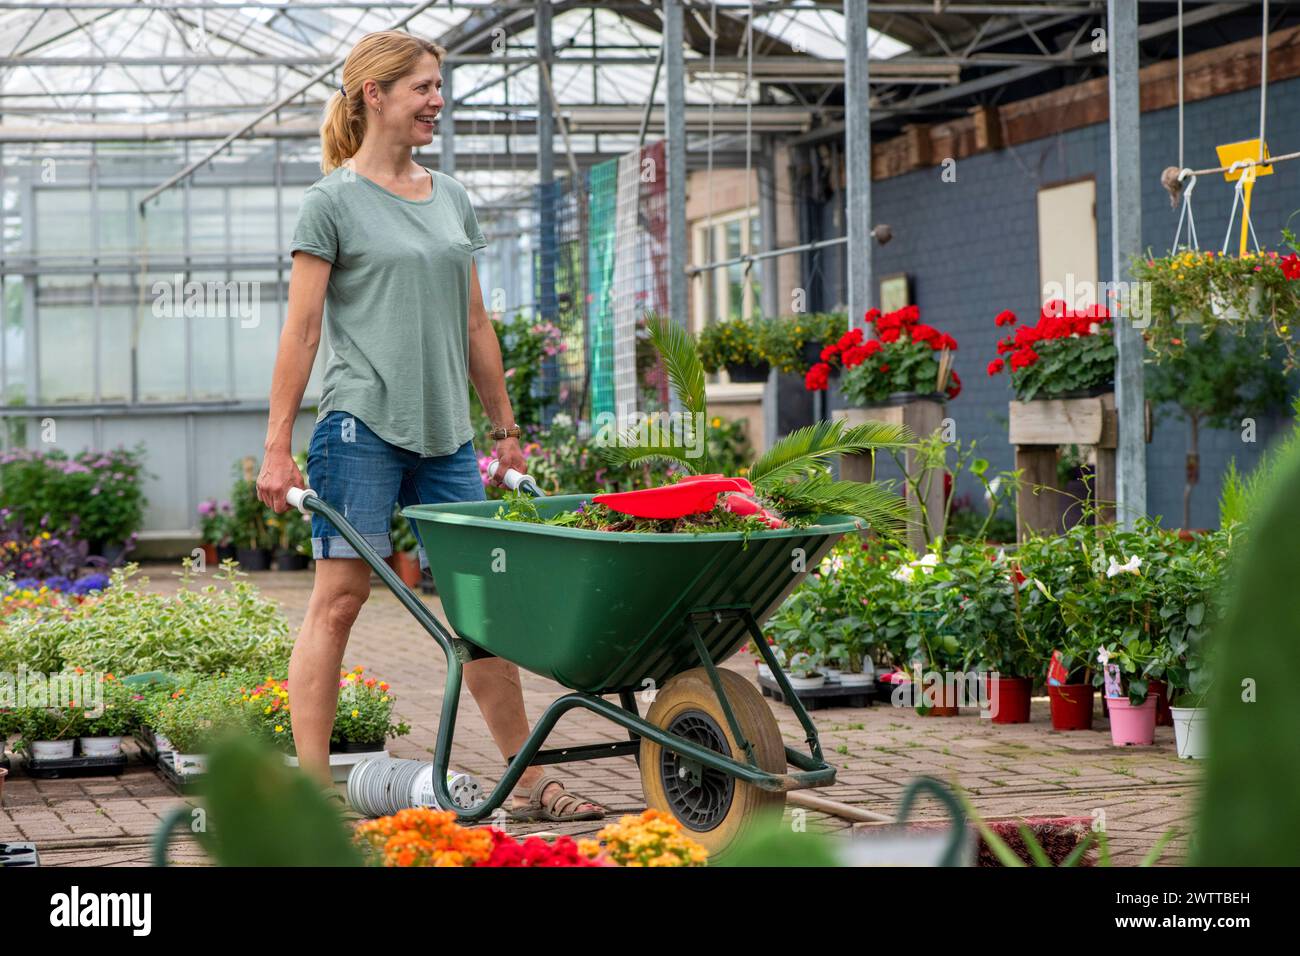 Woman happily tending to her garden shopping with a wheelbarrow full of plants. Stock Photo